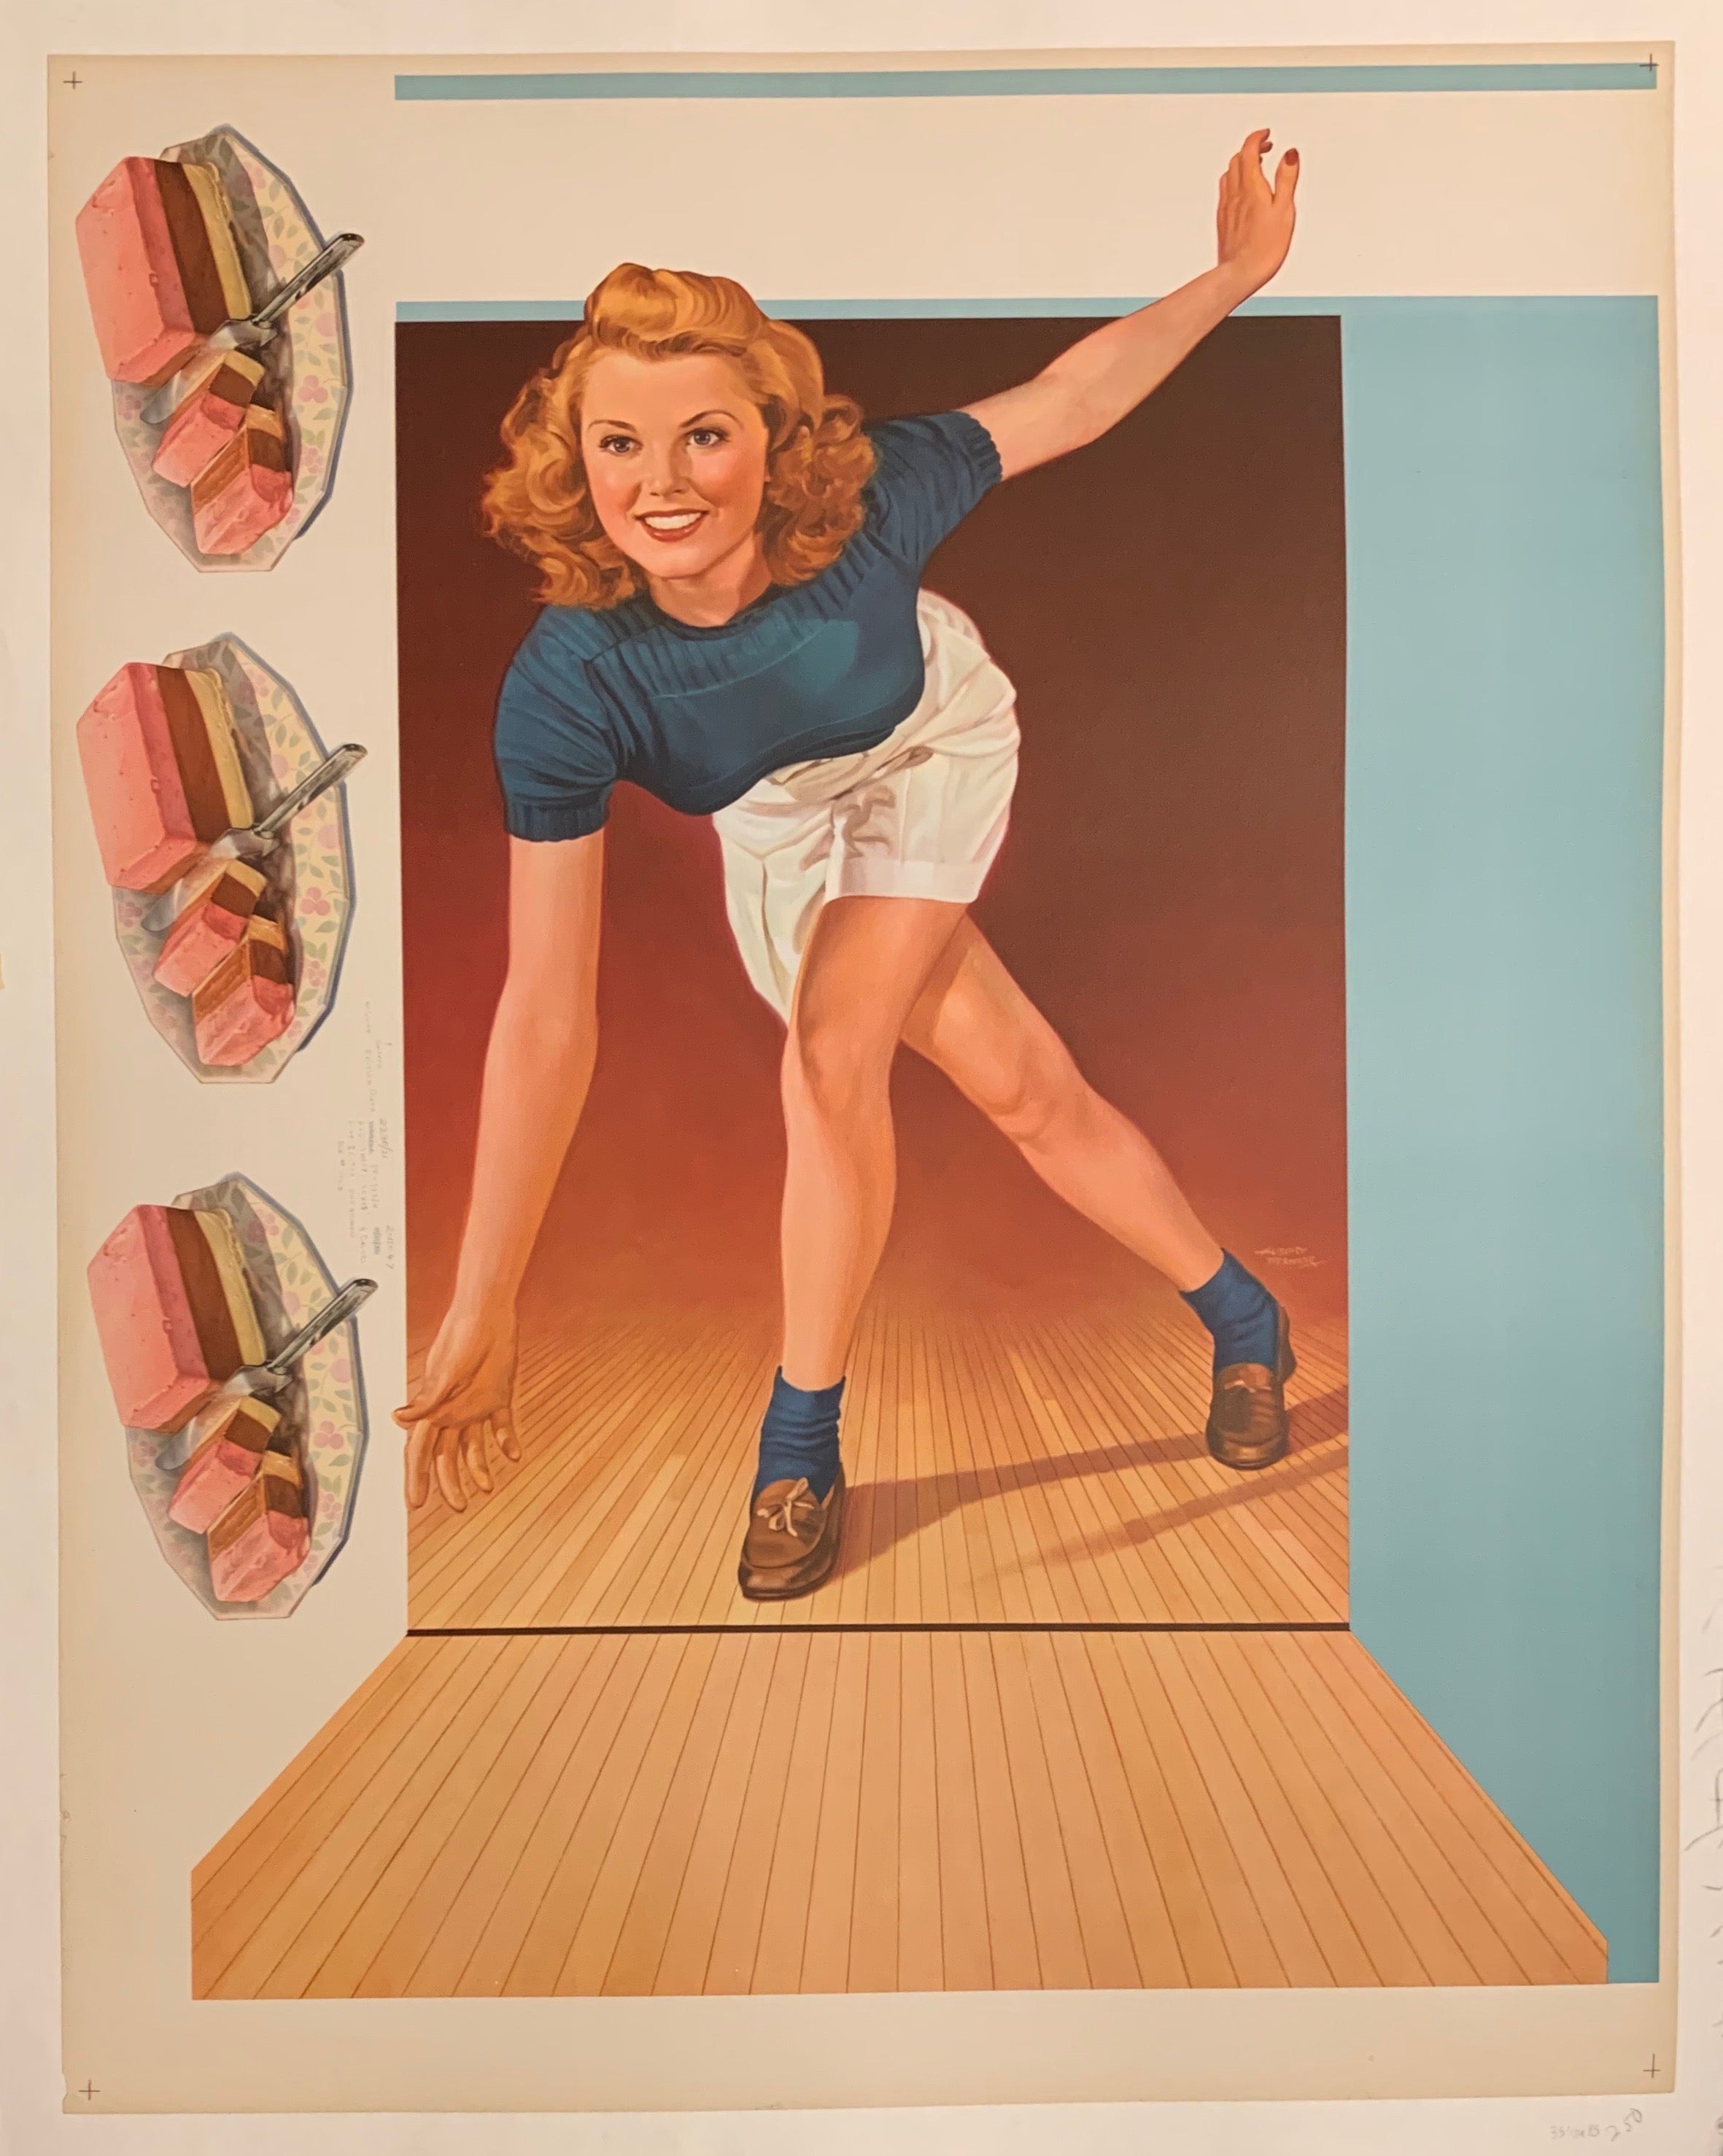 Bowling with Neapolitans Poster